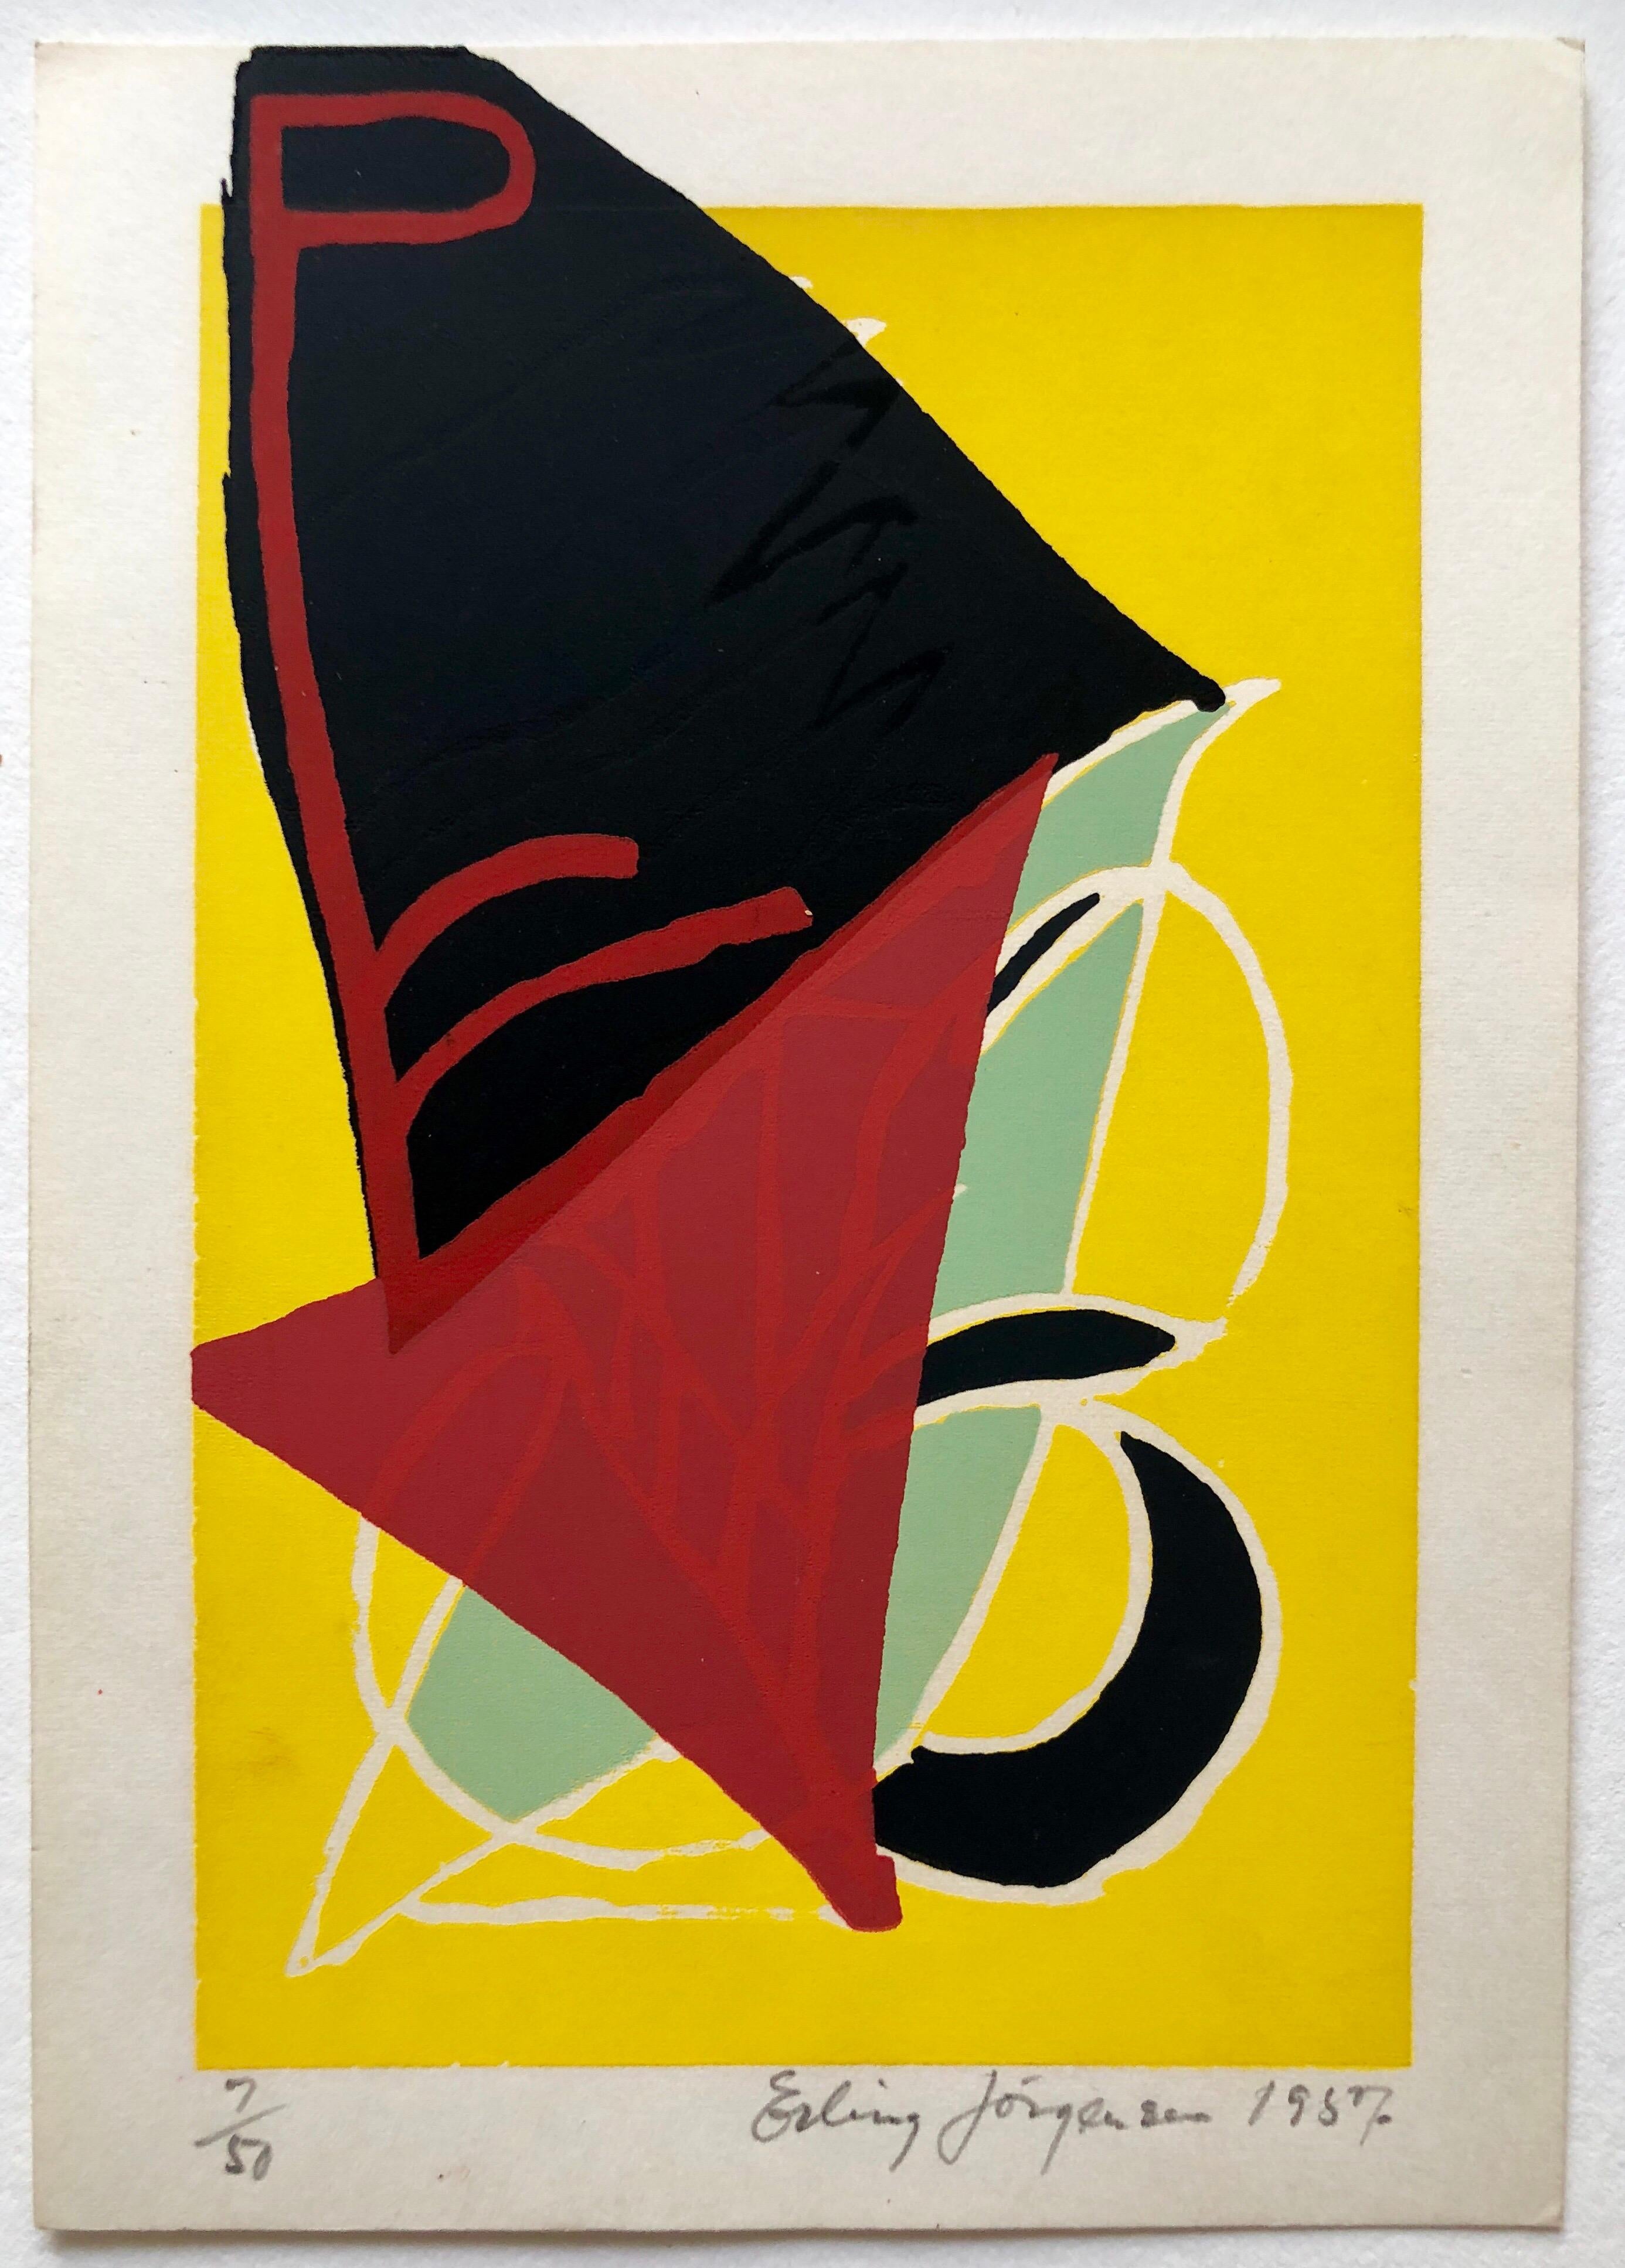 Cobra Artist 1950s Silkscreen Serigraph Bright Colorful Abstract Hand Signed - Abstract Expressionist Print by Erling Jorgensen